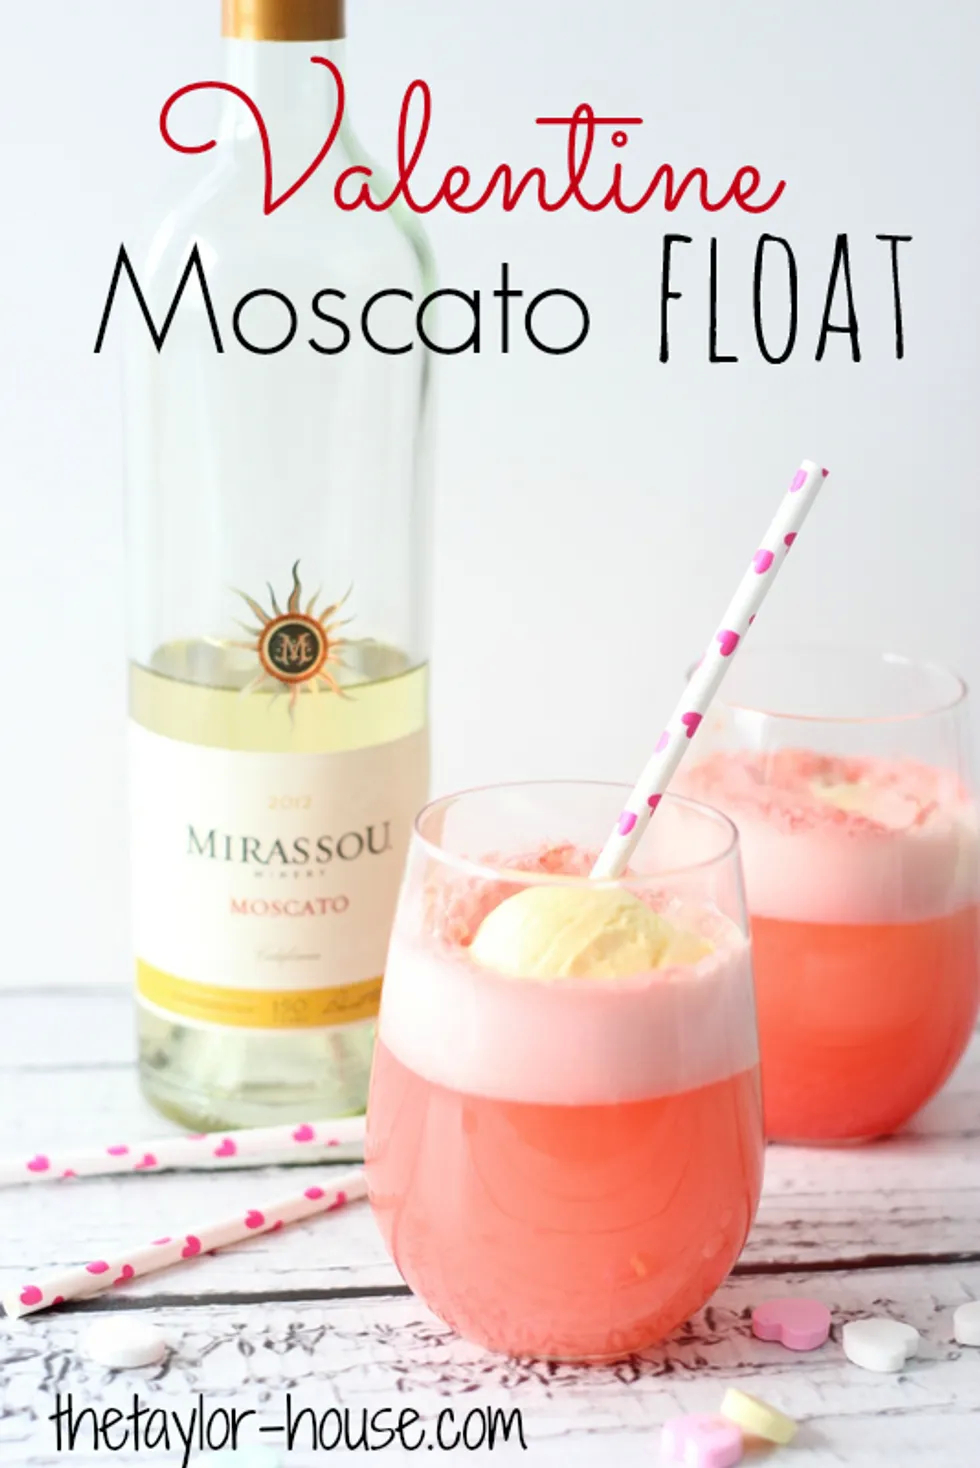 Moscato Float